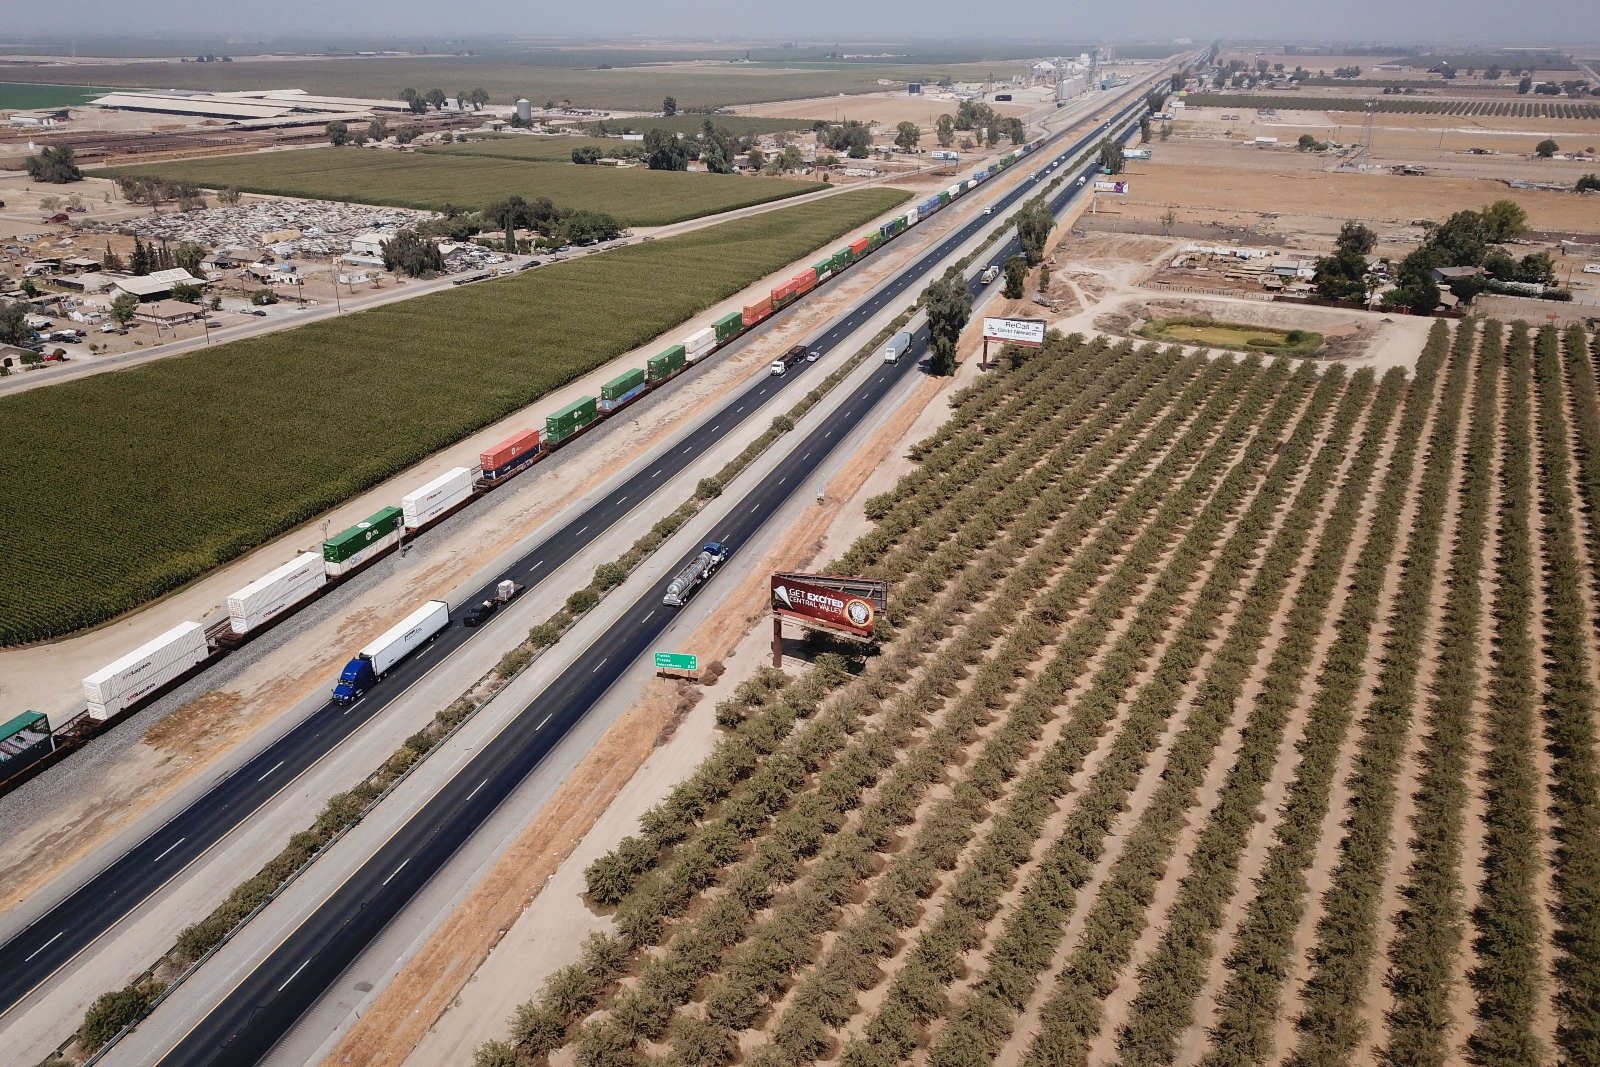 Vehicles drive past farmland and a freight train though Tulare County in the Central Valley near Pixley, California, in 2021.